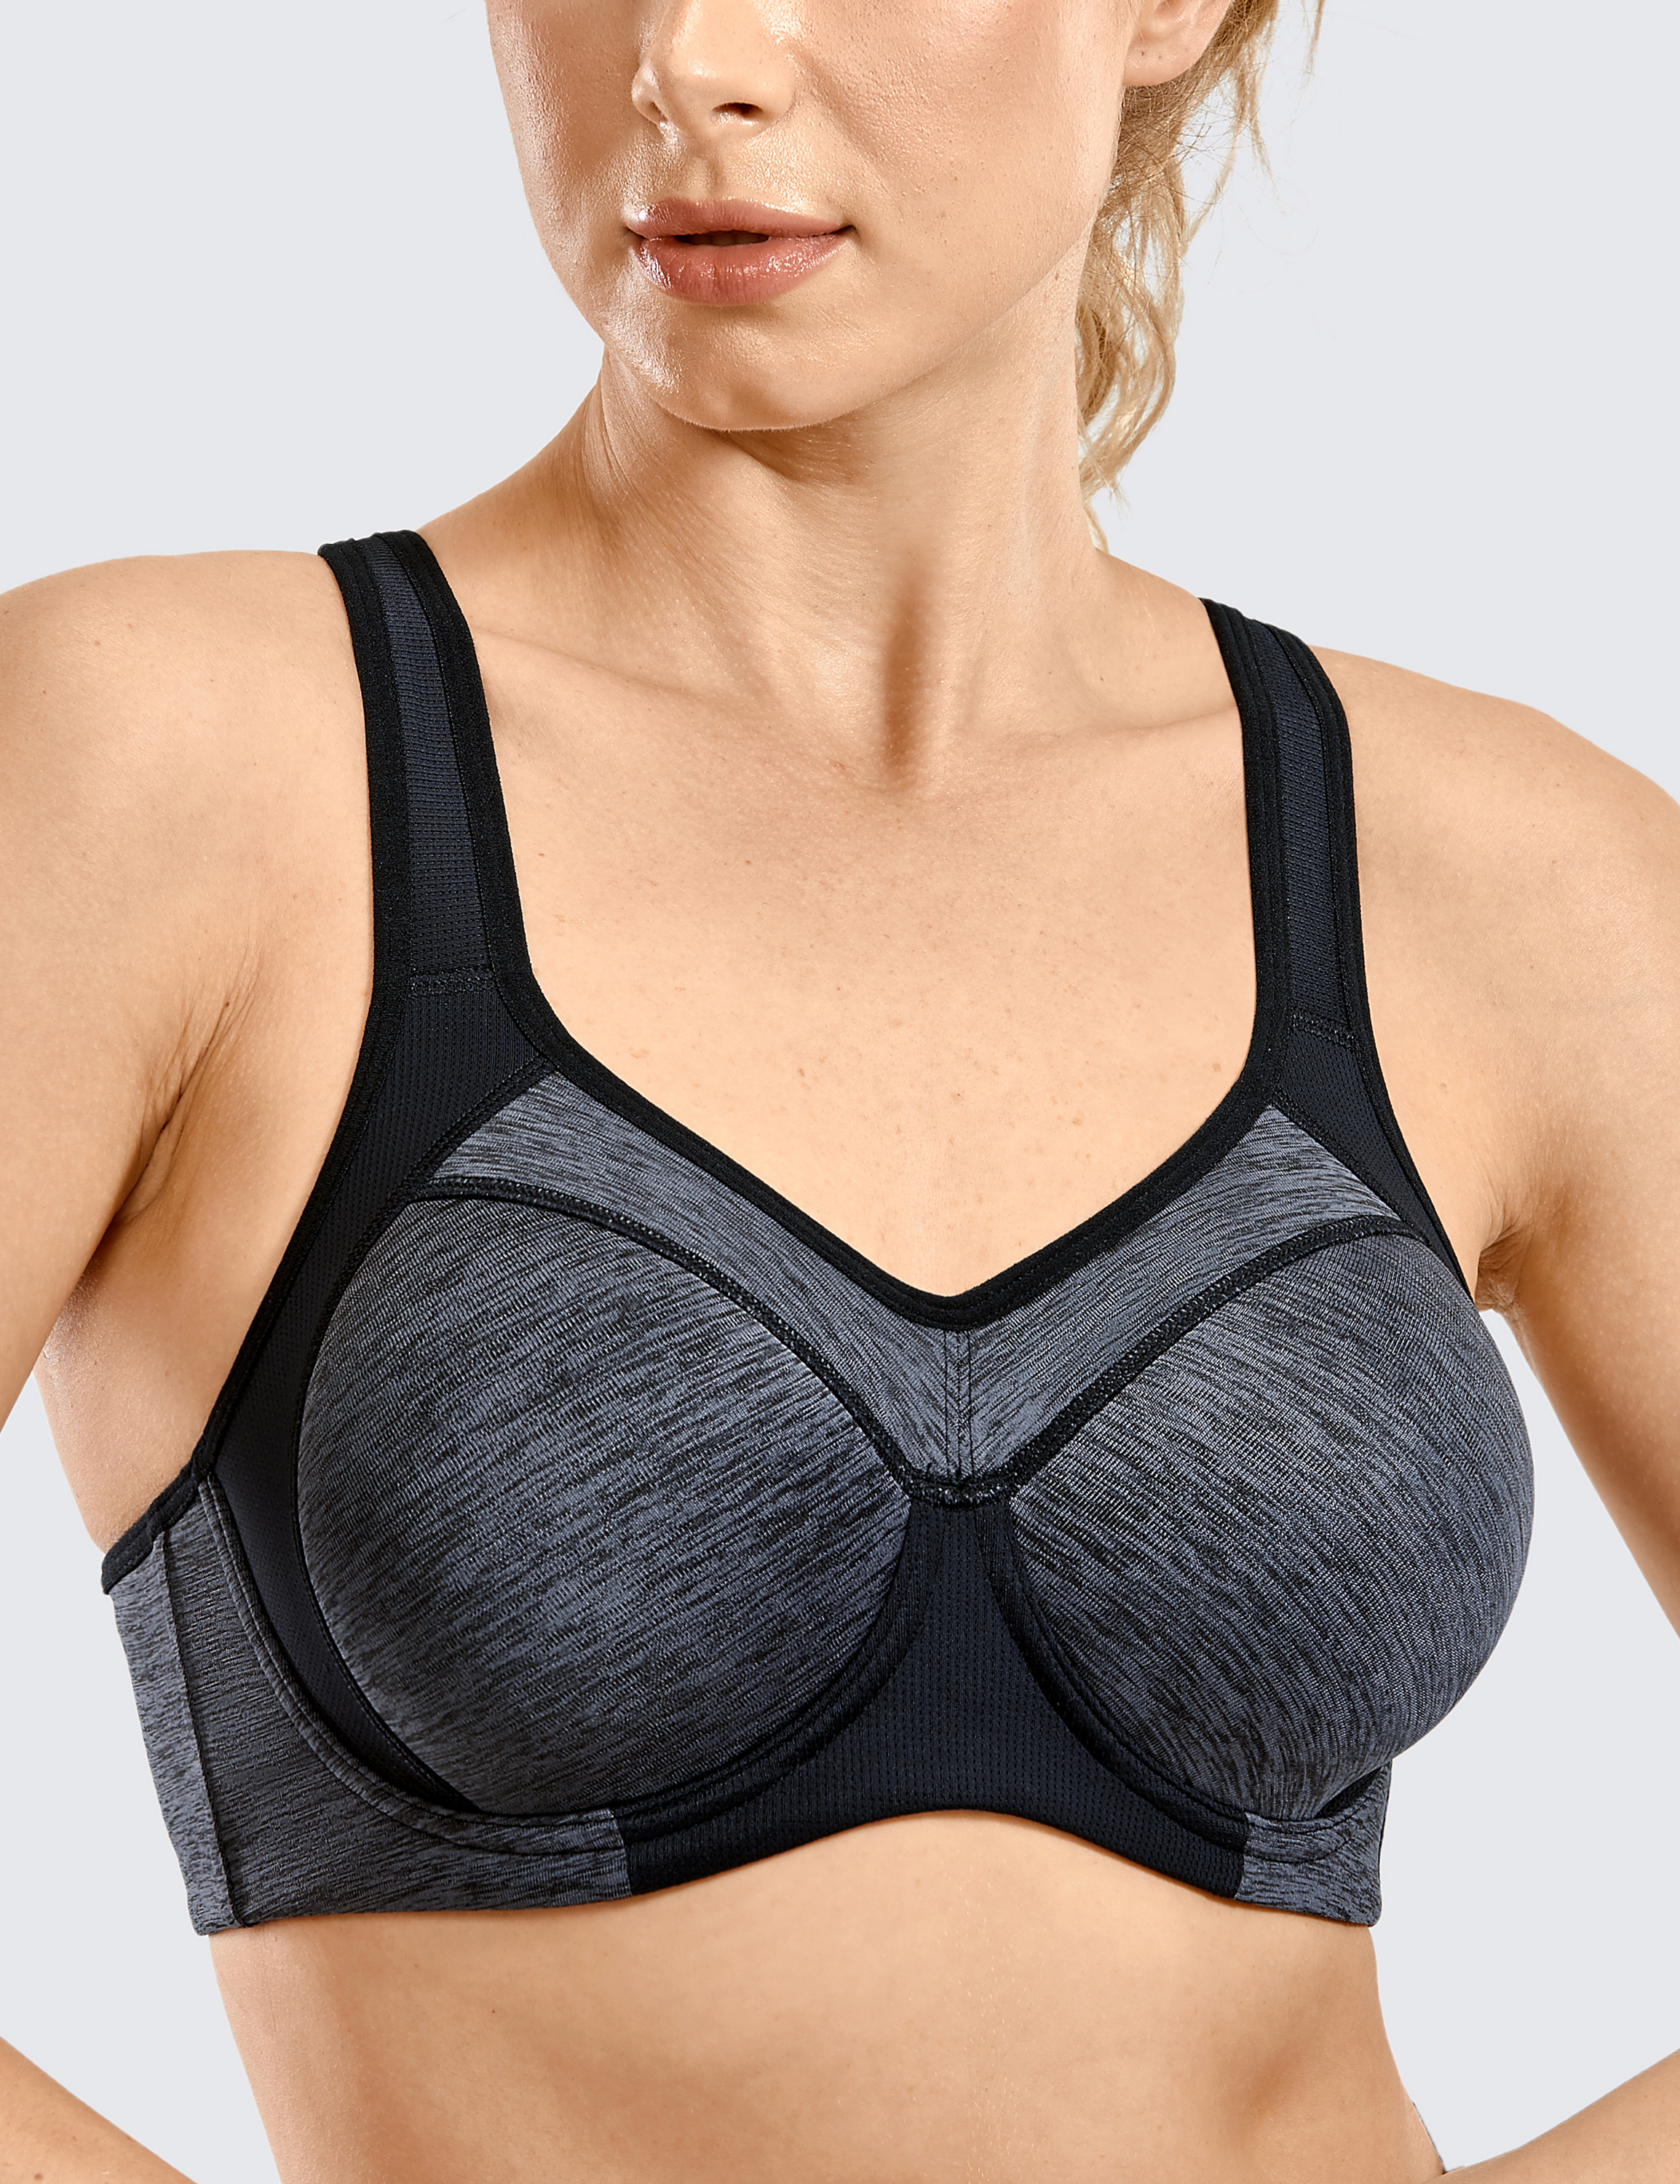 thumbnail 13 - SYROKAN Women&#039;s Underwire Sports Bra Support High Impact Racerback Lightly Lined